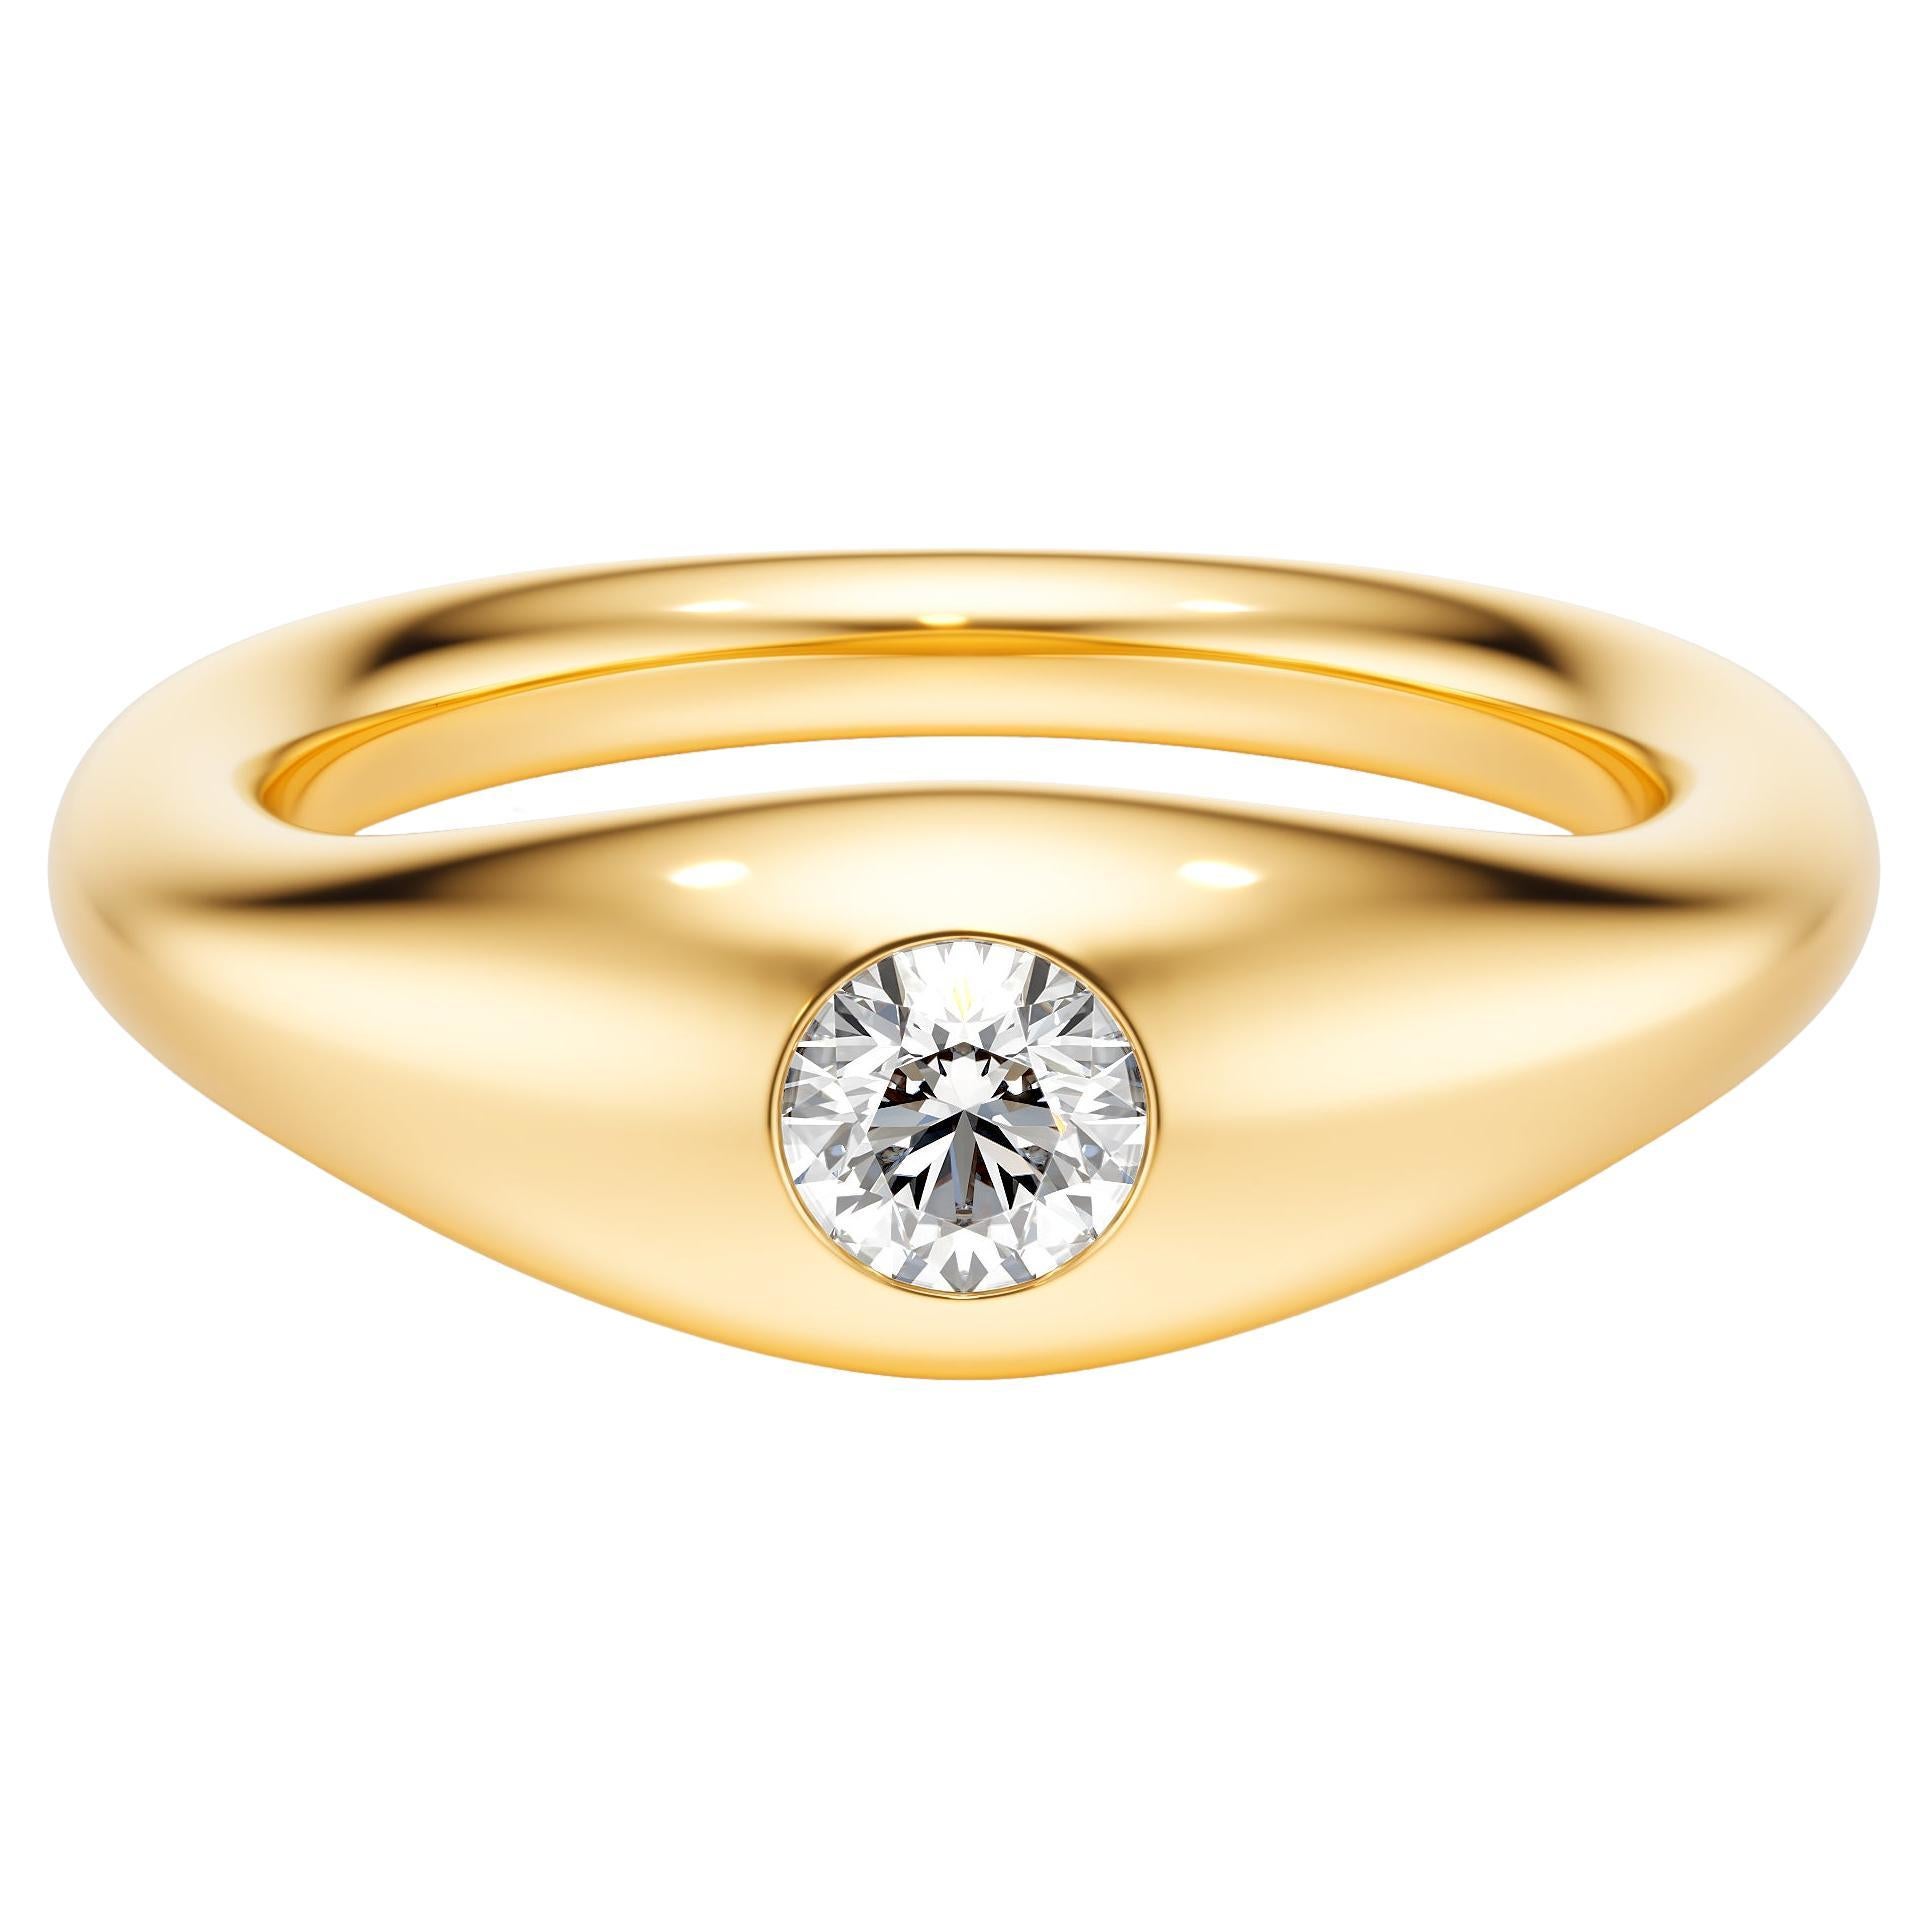 For Sale:  Ruth Nyc Lun Ring, 14k Yellow Gold and Diamond